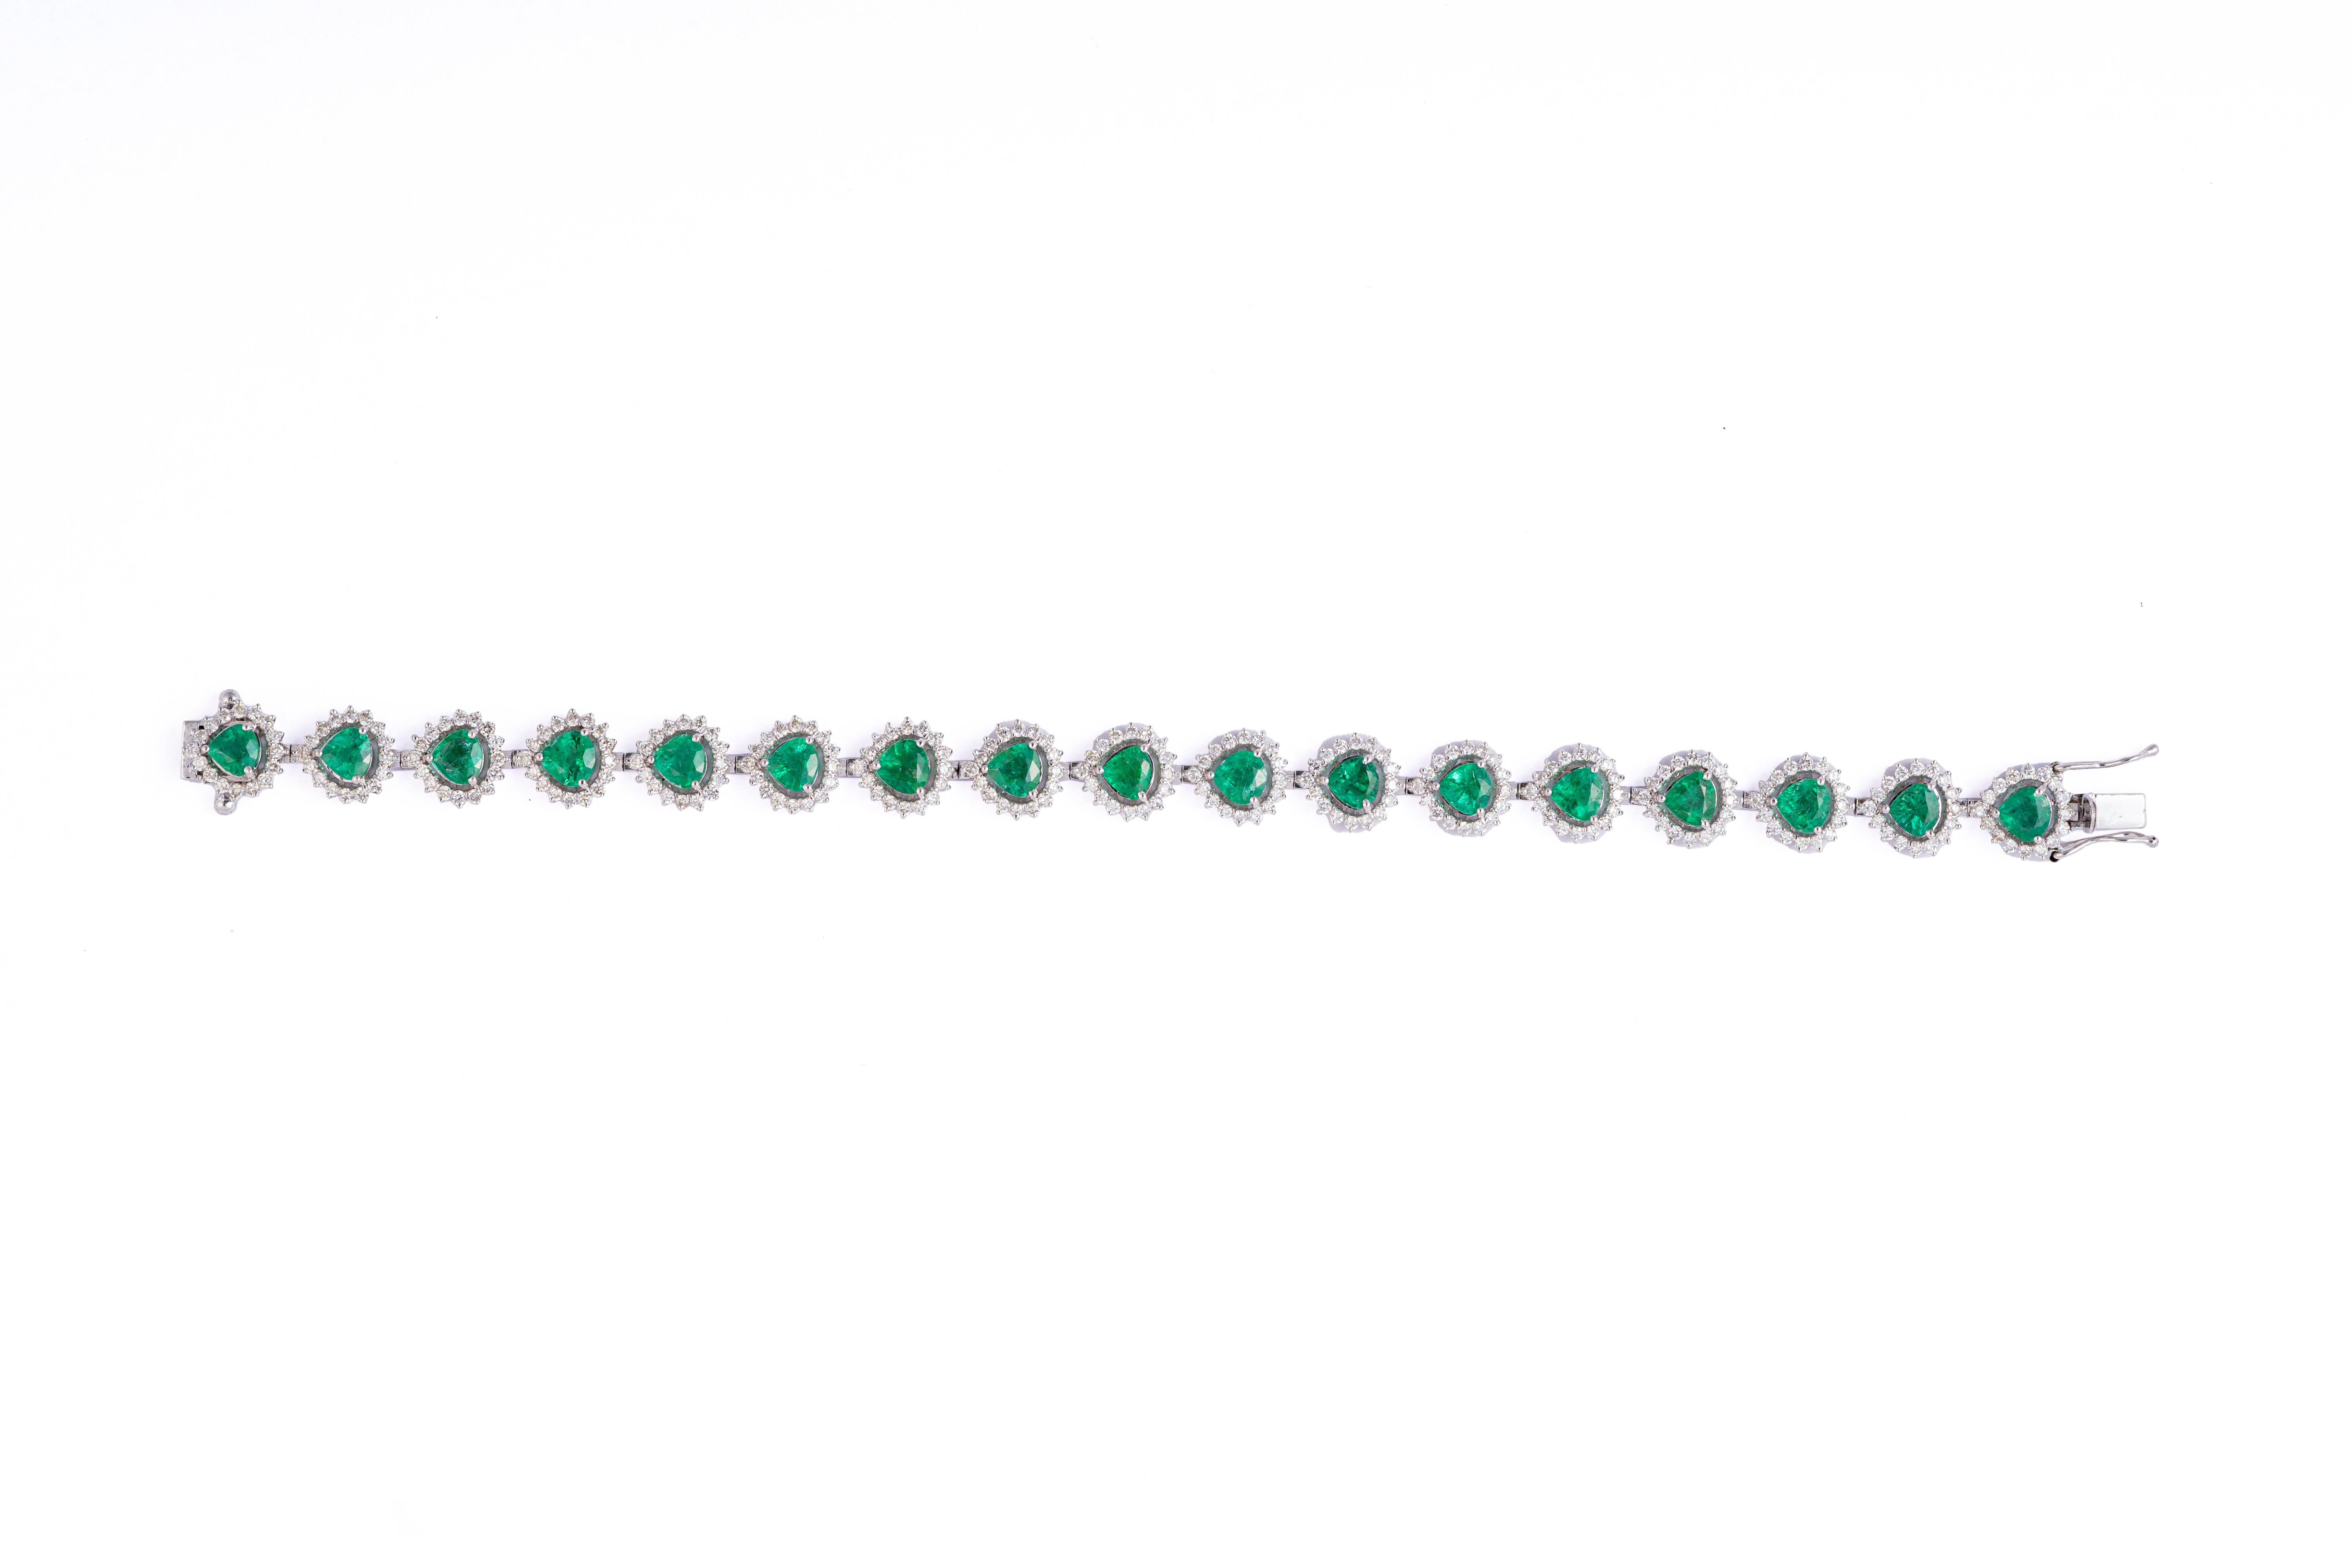 This is an awesome natural Zambian bracelet which has very high quality emeralds and very good
quality diamonds which are vsi clarity and G colour 
emeralds :7.42cts
diamonds: 3.00cts
gold : 14.79gms
very hard to capture the true color and luster of